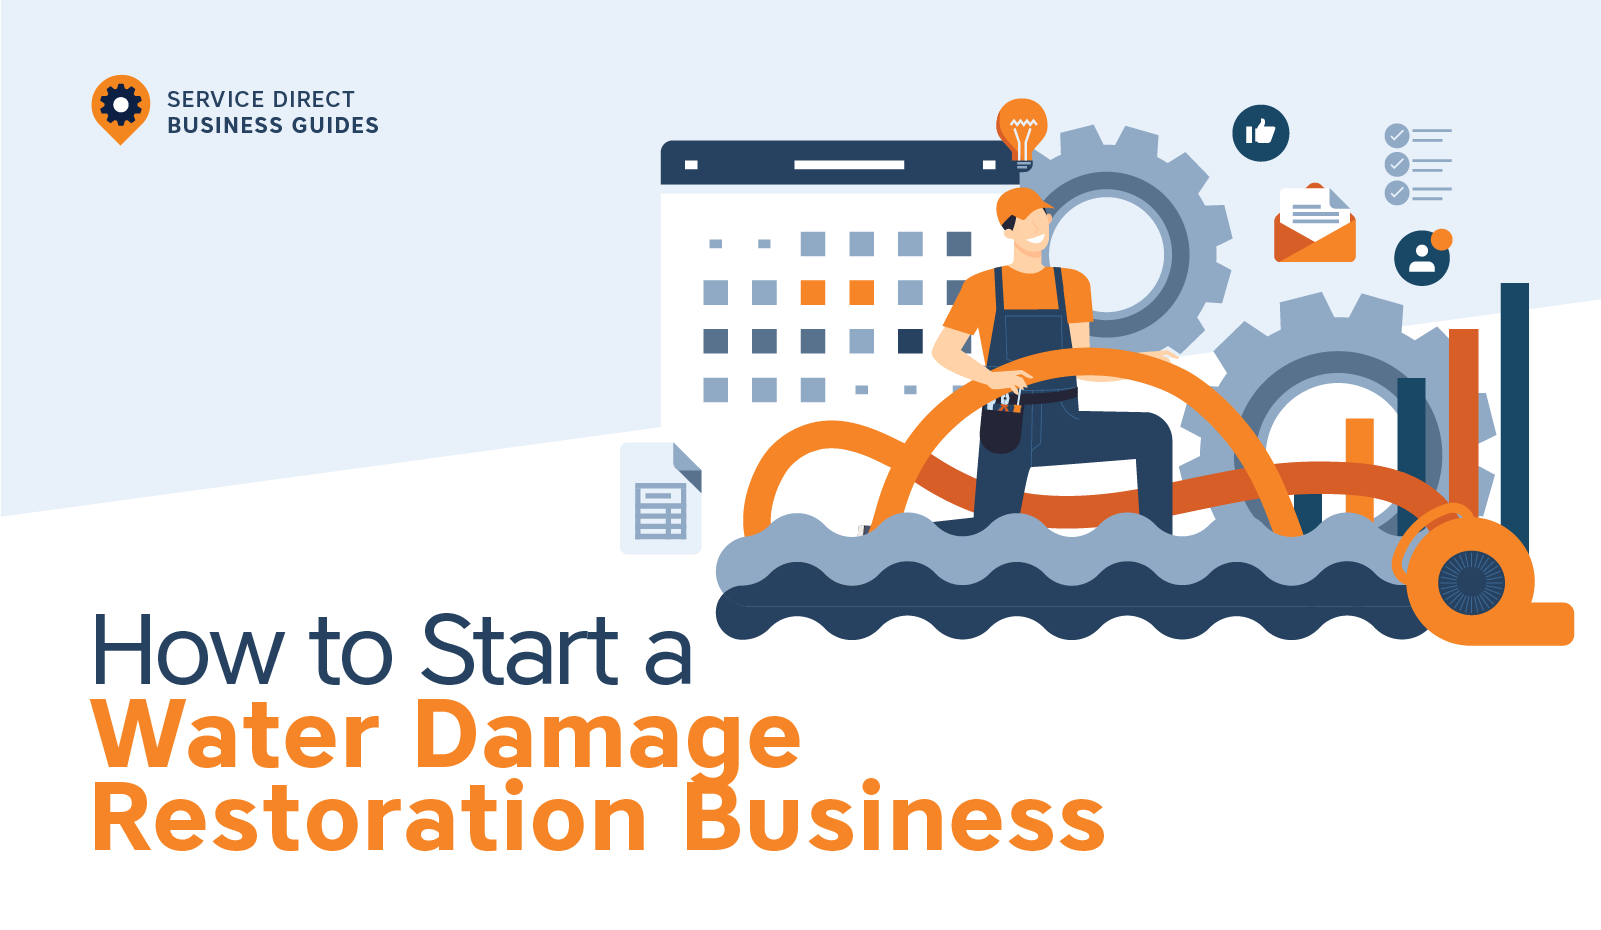 How to Start a Water Damage Business